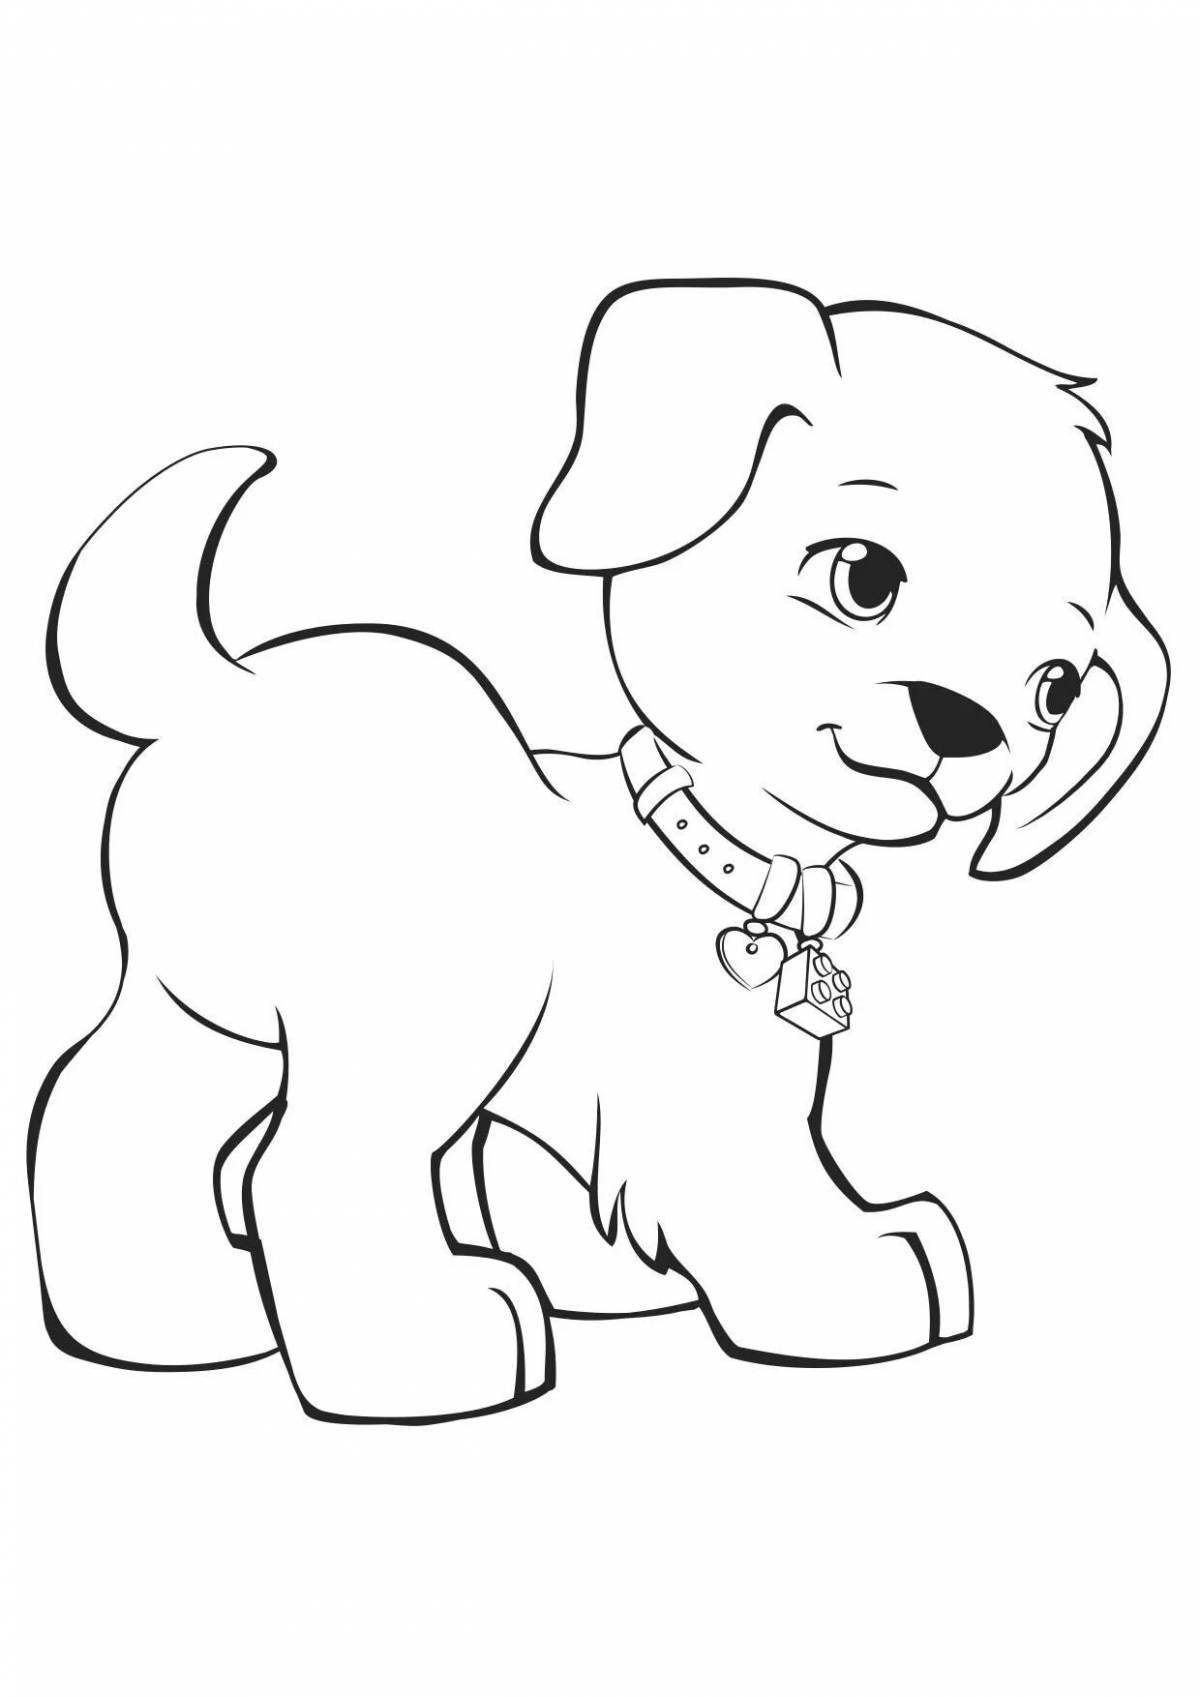 Energetic dog coloring pages for boys